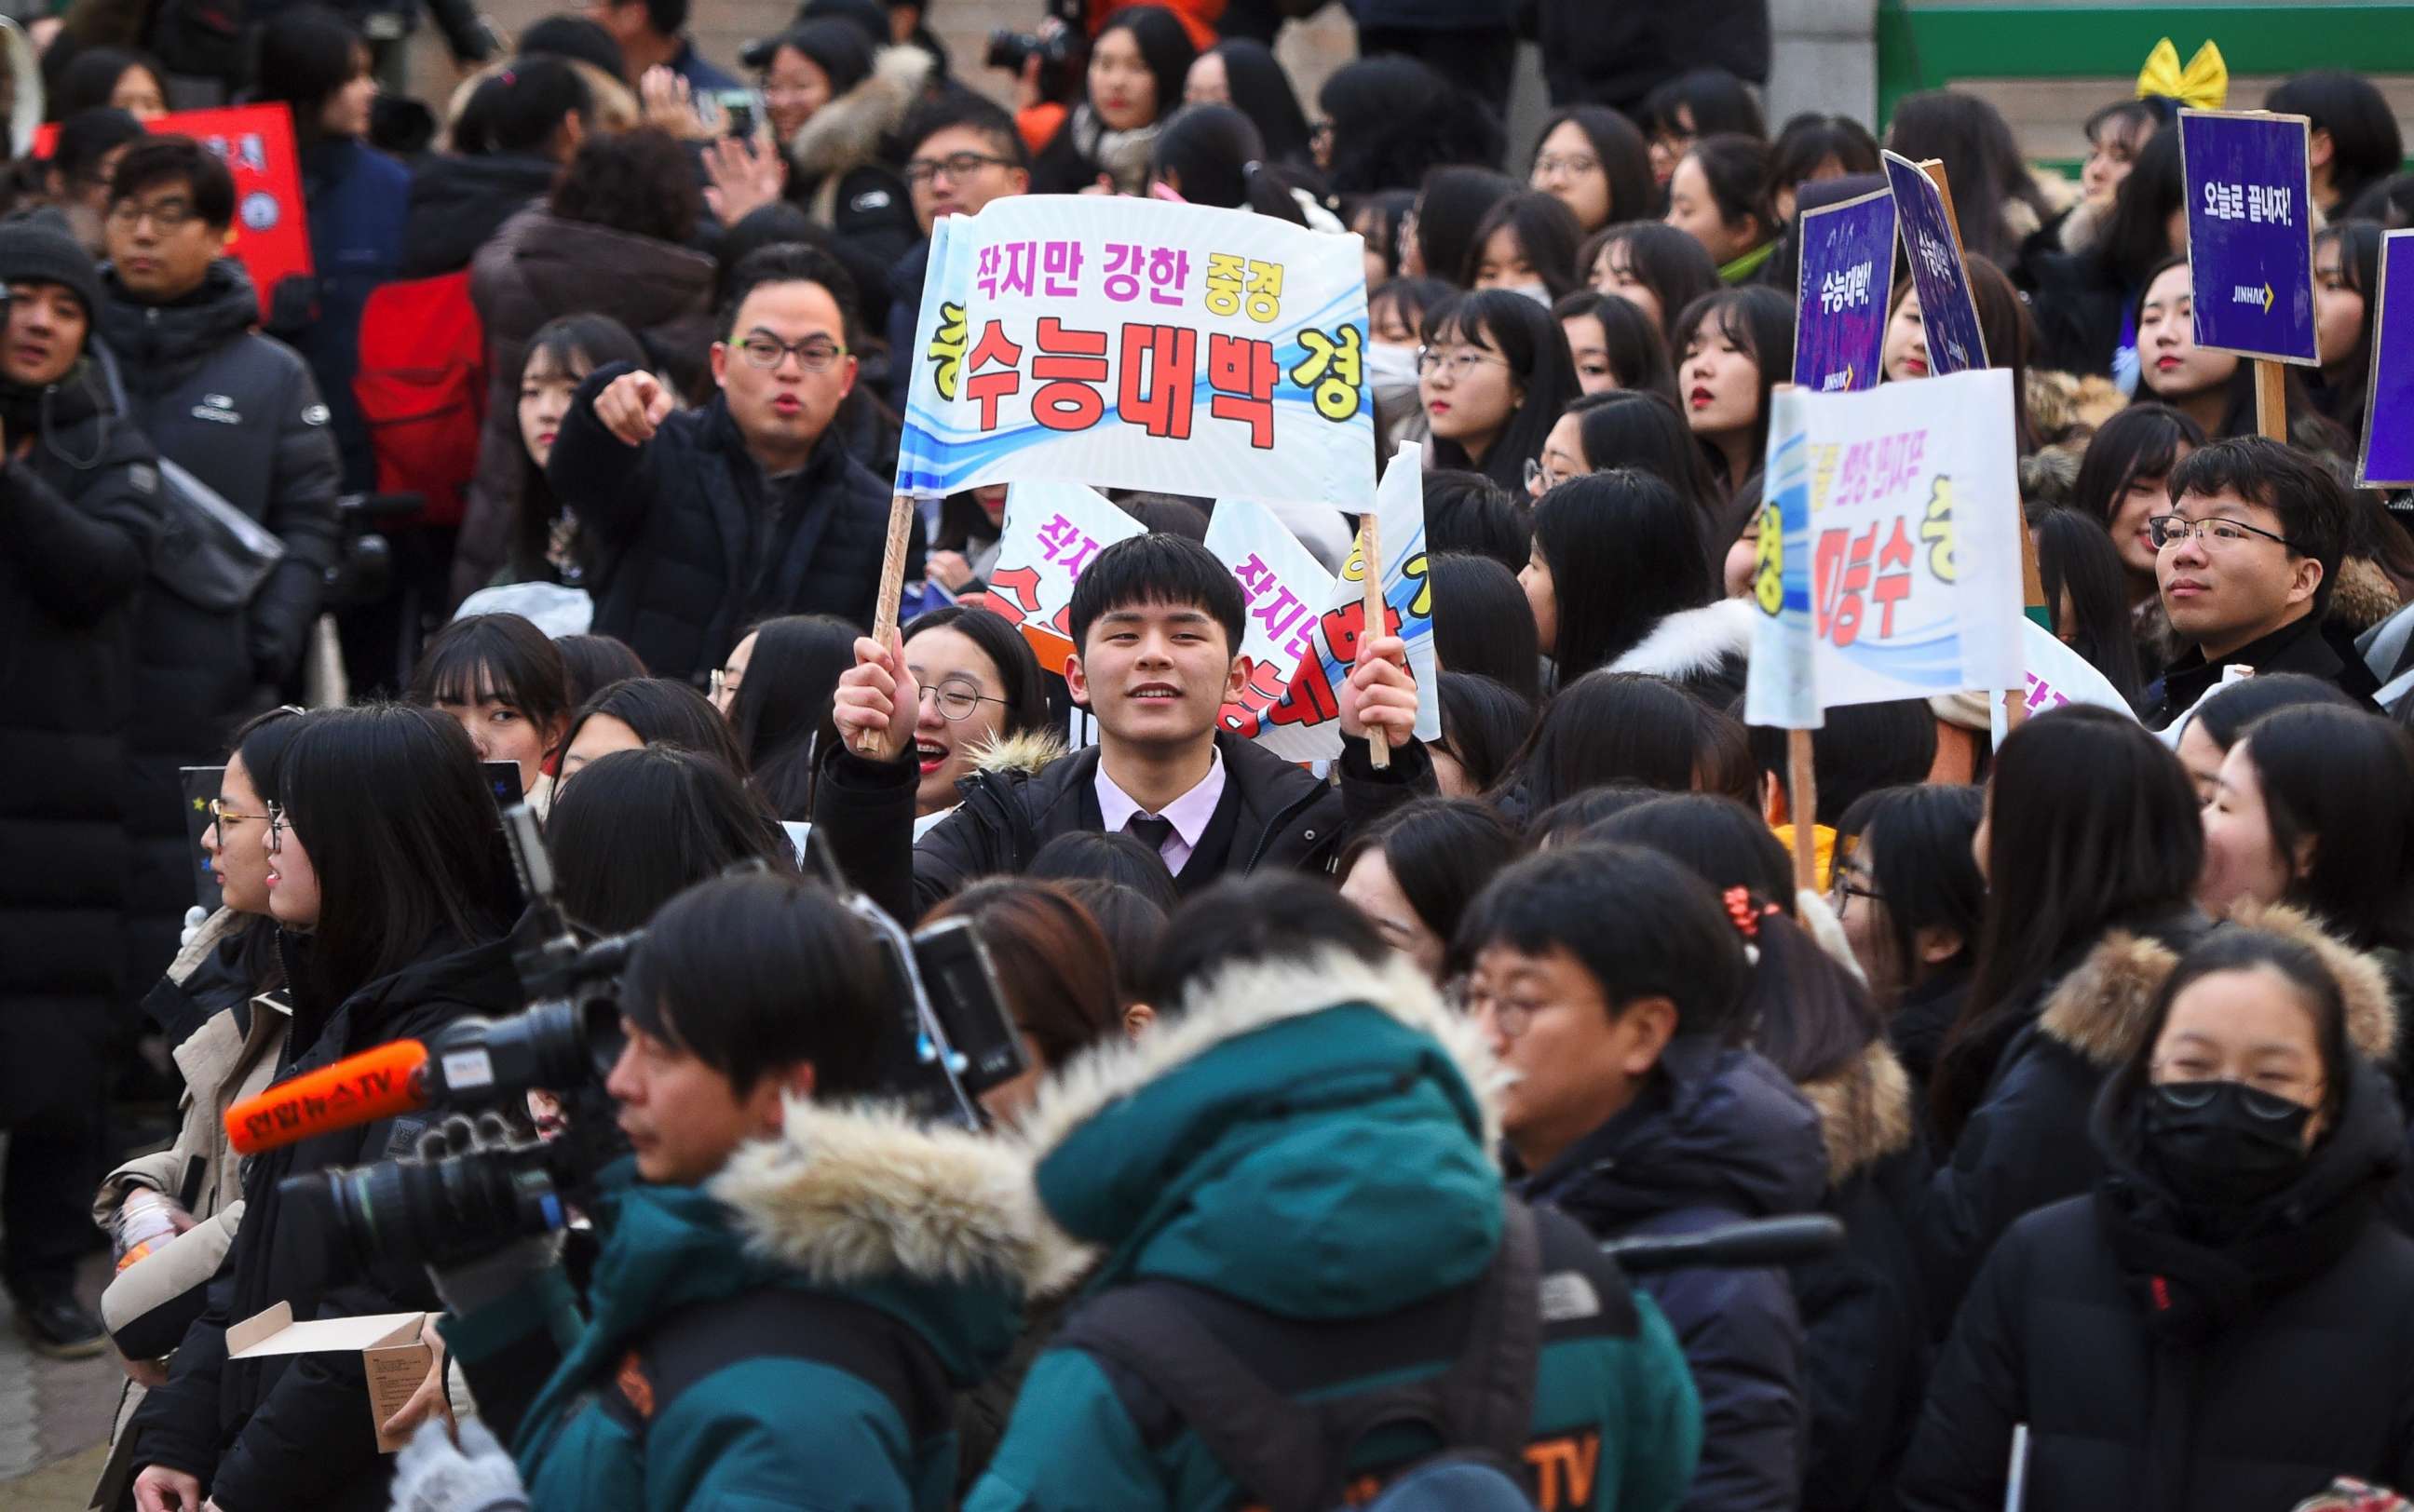 High school students cheer their seniors taking the annual College Scholastic Ability Test, a standardized exam for college entrance, at a high school in Seoul on November 23, 2017.